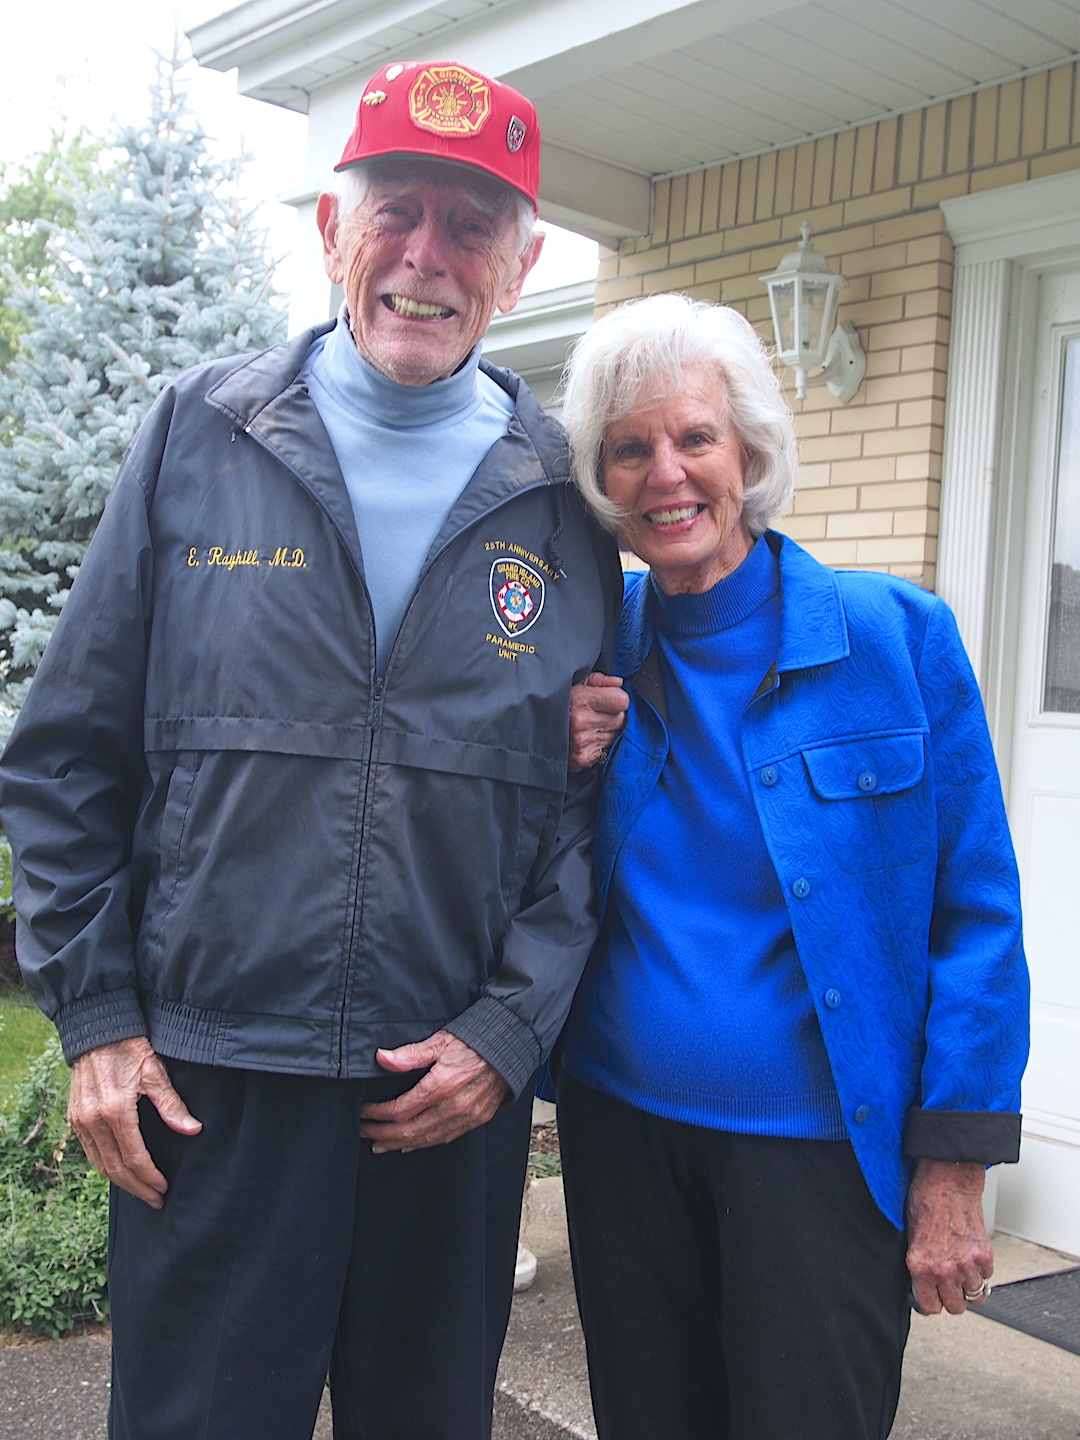 Dr. Edward `Ted` and Joanne Rayhill enjoy the fire company inspection held at their home.